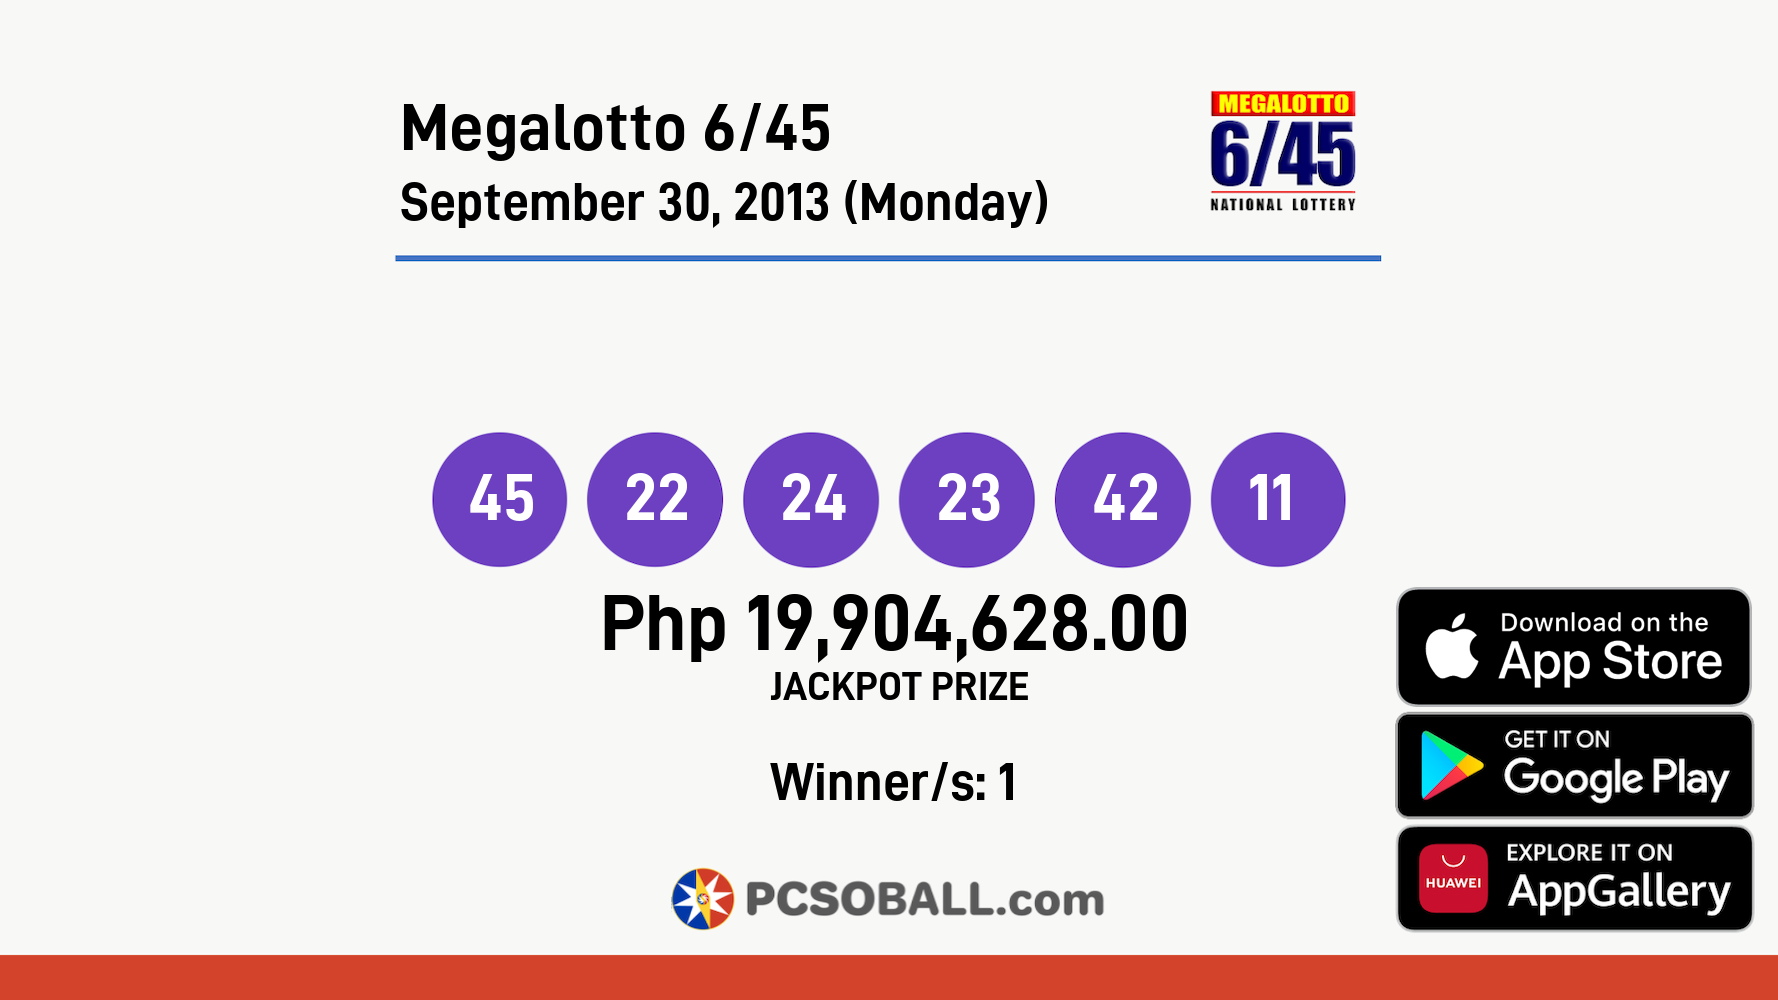 Megalotto 6/45 September 30, 2013 (Monday) Result